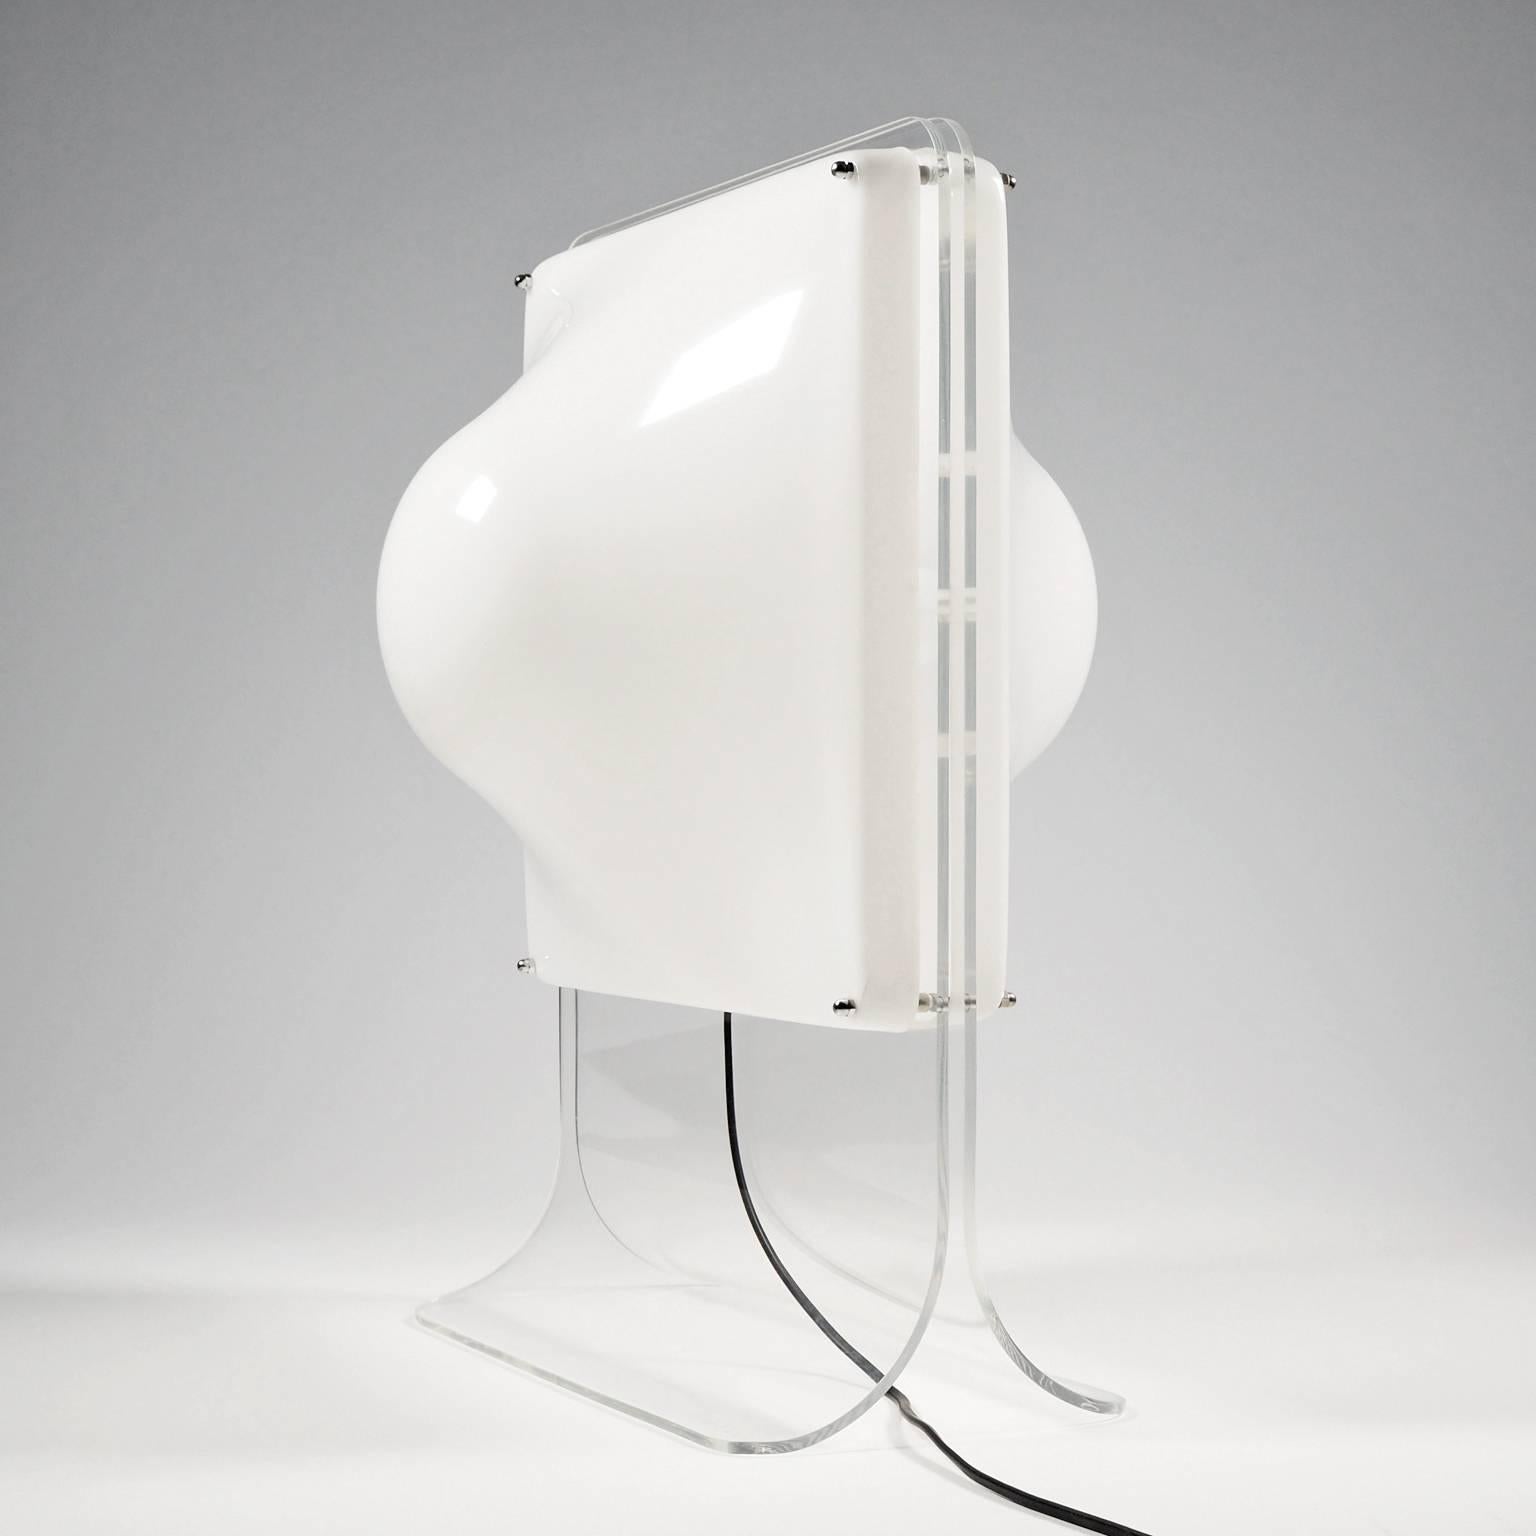 Very rare table lamp from the "Bolla" series designed by Elio Martinelli in 1960. The "Bolla" series were designed as wall and ceiling lights and this is from a most likely very limited edition of table lamps. Overall very good